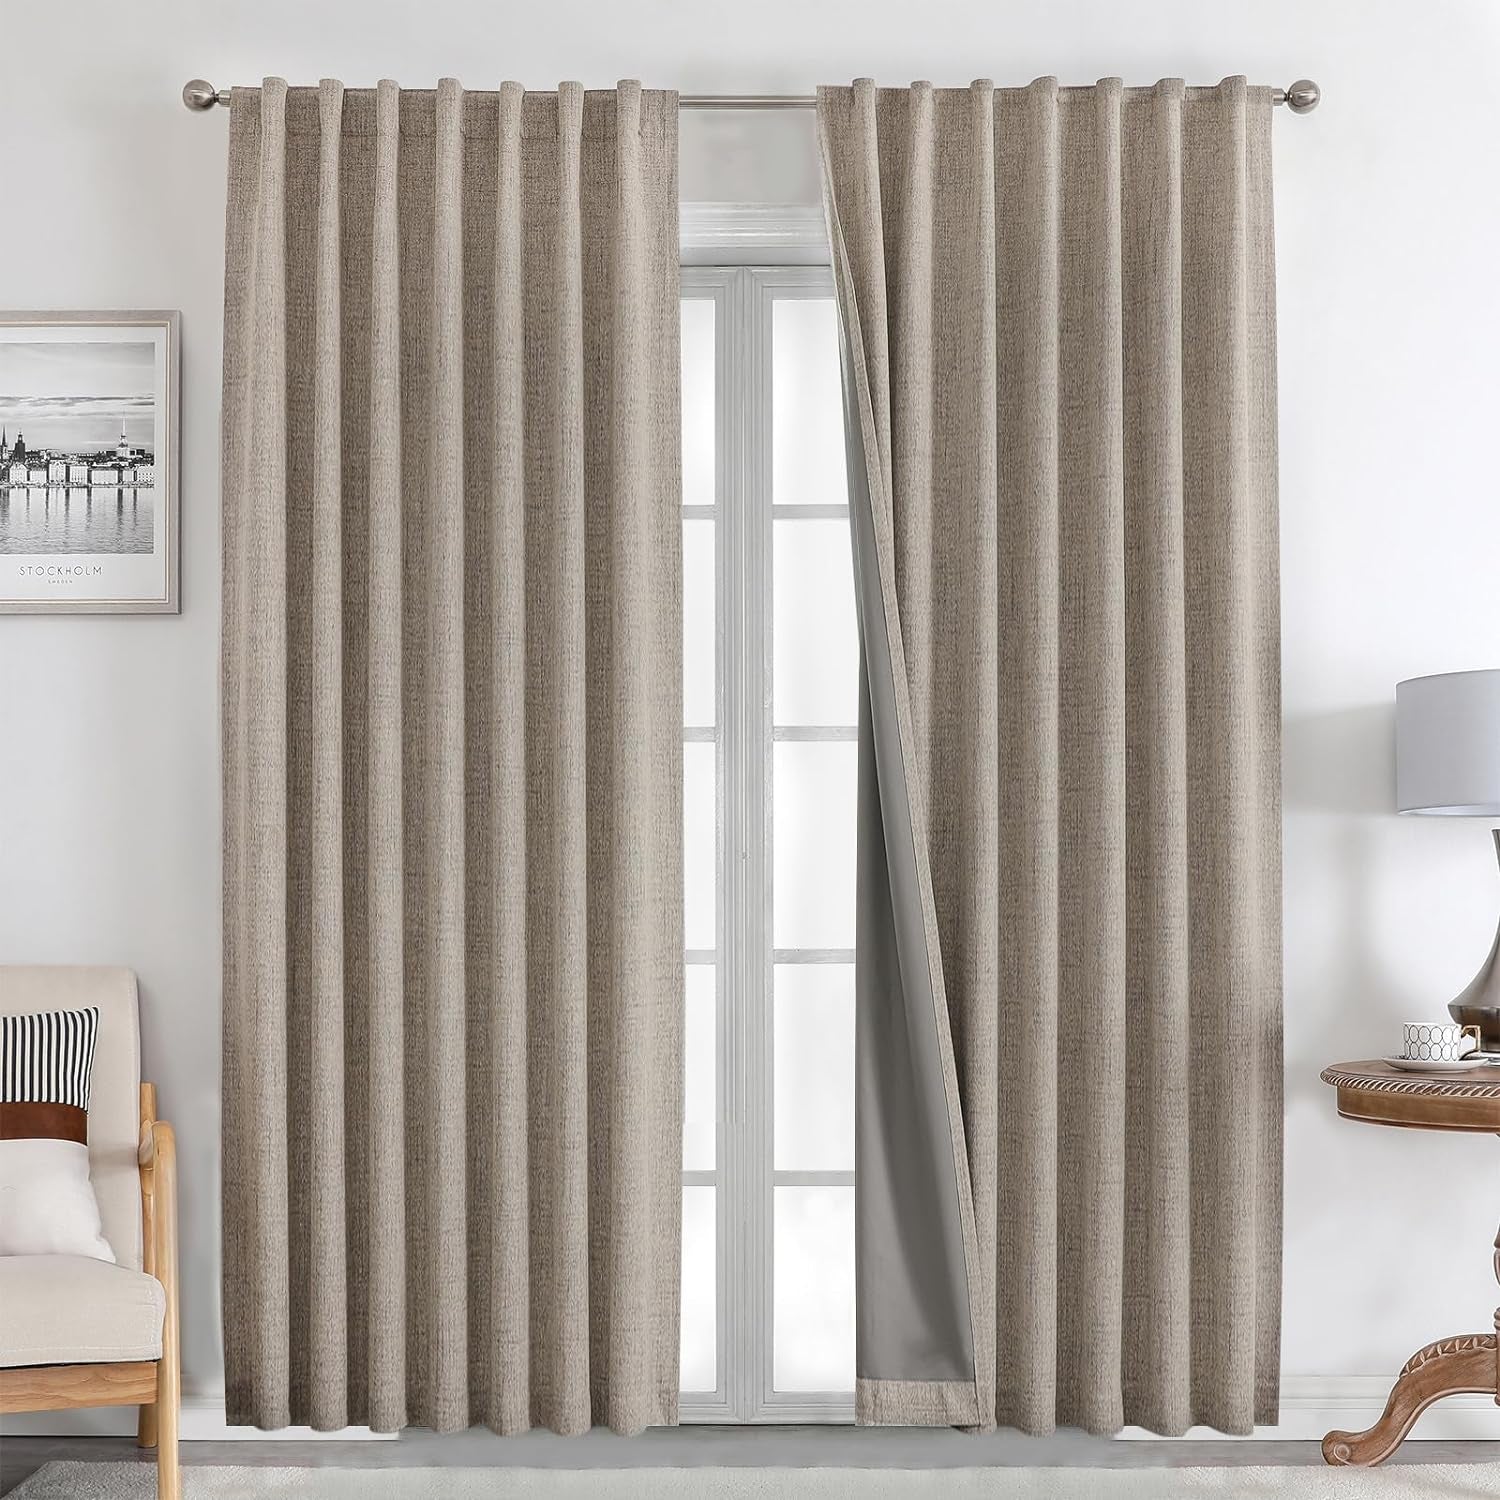 Natural Linen Curtains 84 Inch Length 2 Panels Set Burg 100% Blackout Thermal Insulated Back Tab Rod Pocket(52X84 Inch,Linen)